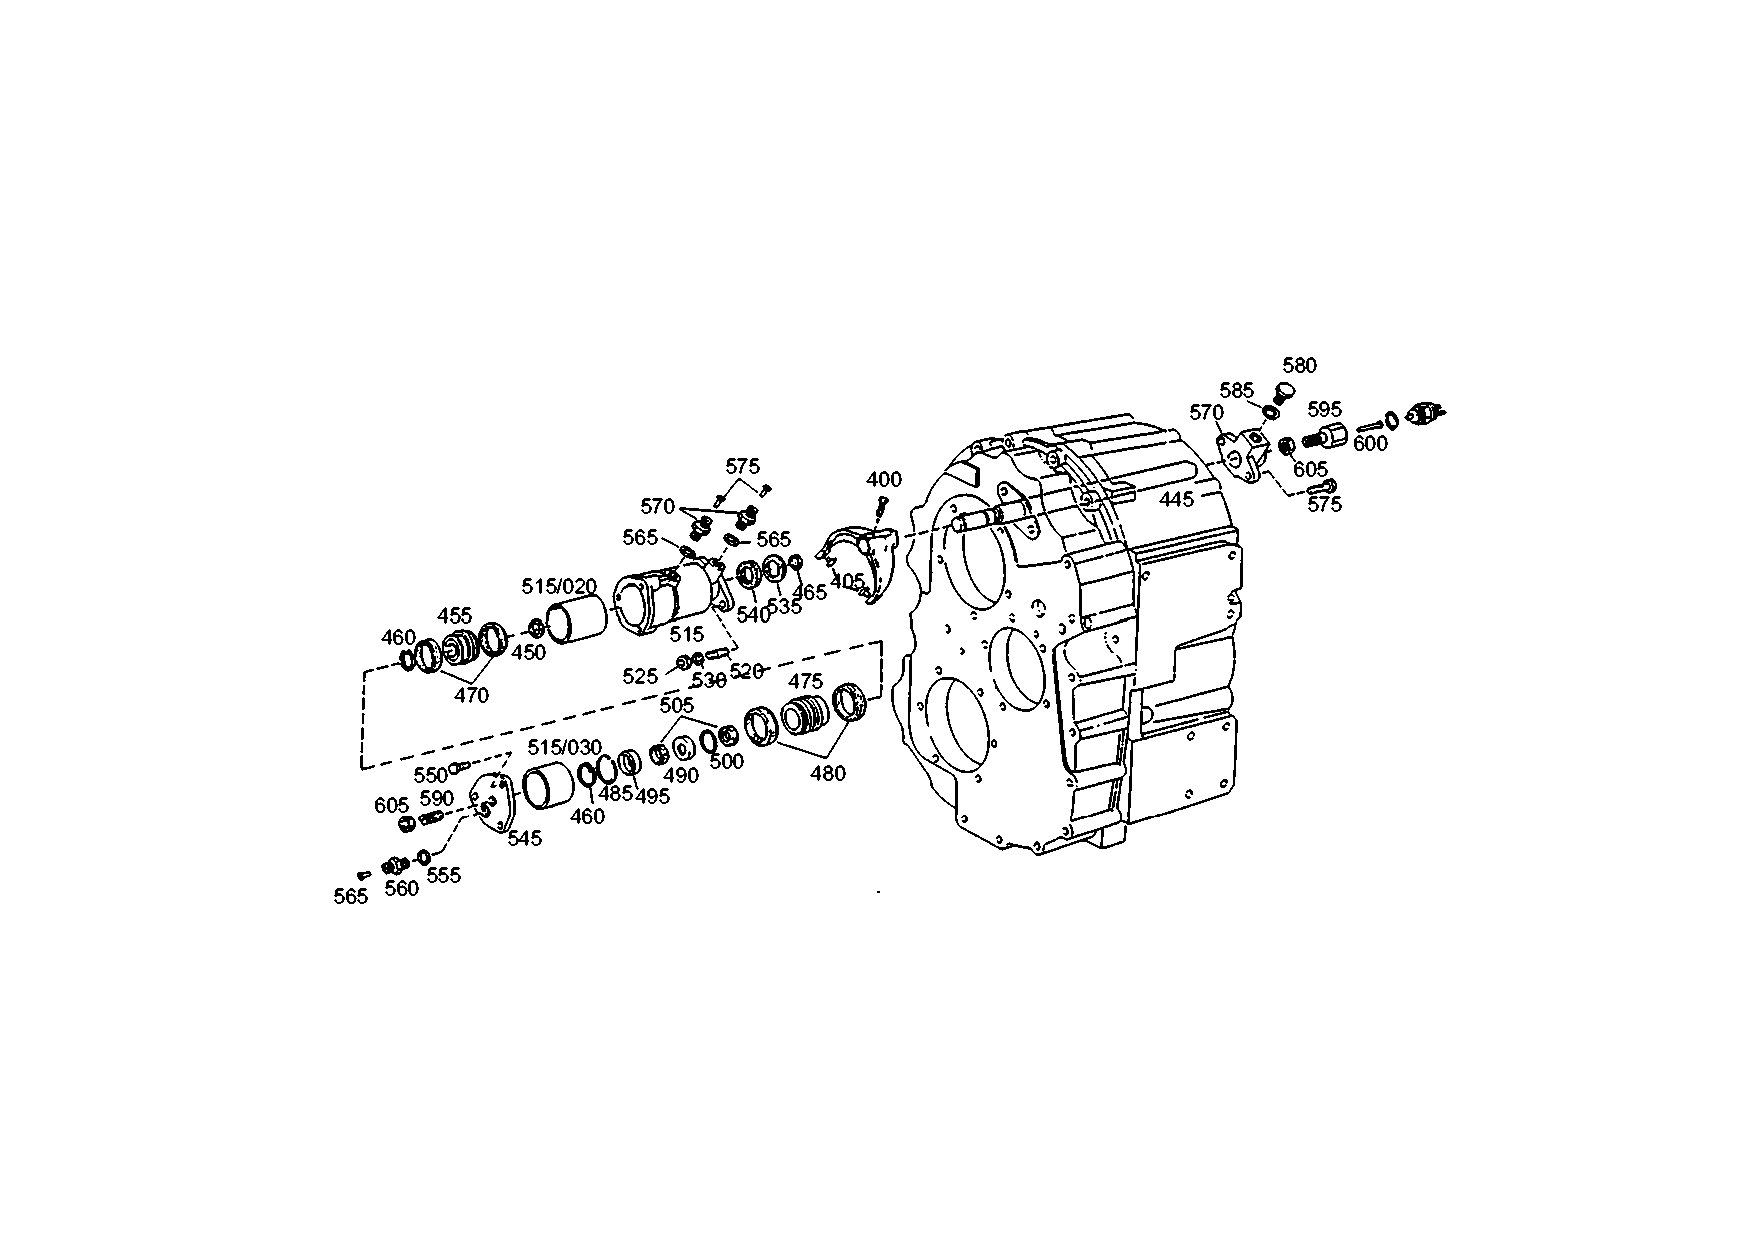 drawing for MARMON Herring MVG121050 - INPUT SHAFT (figure 4)